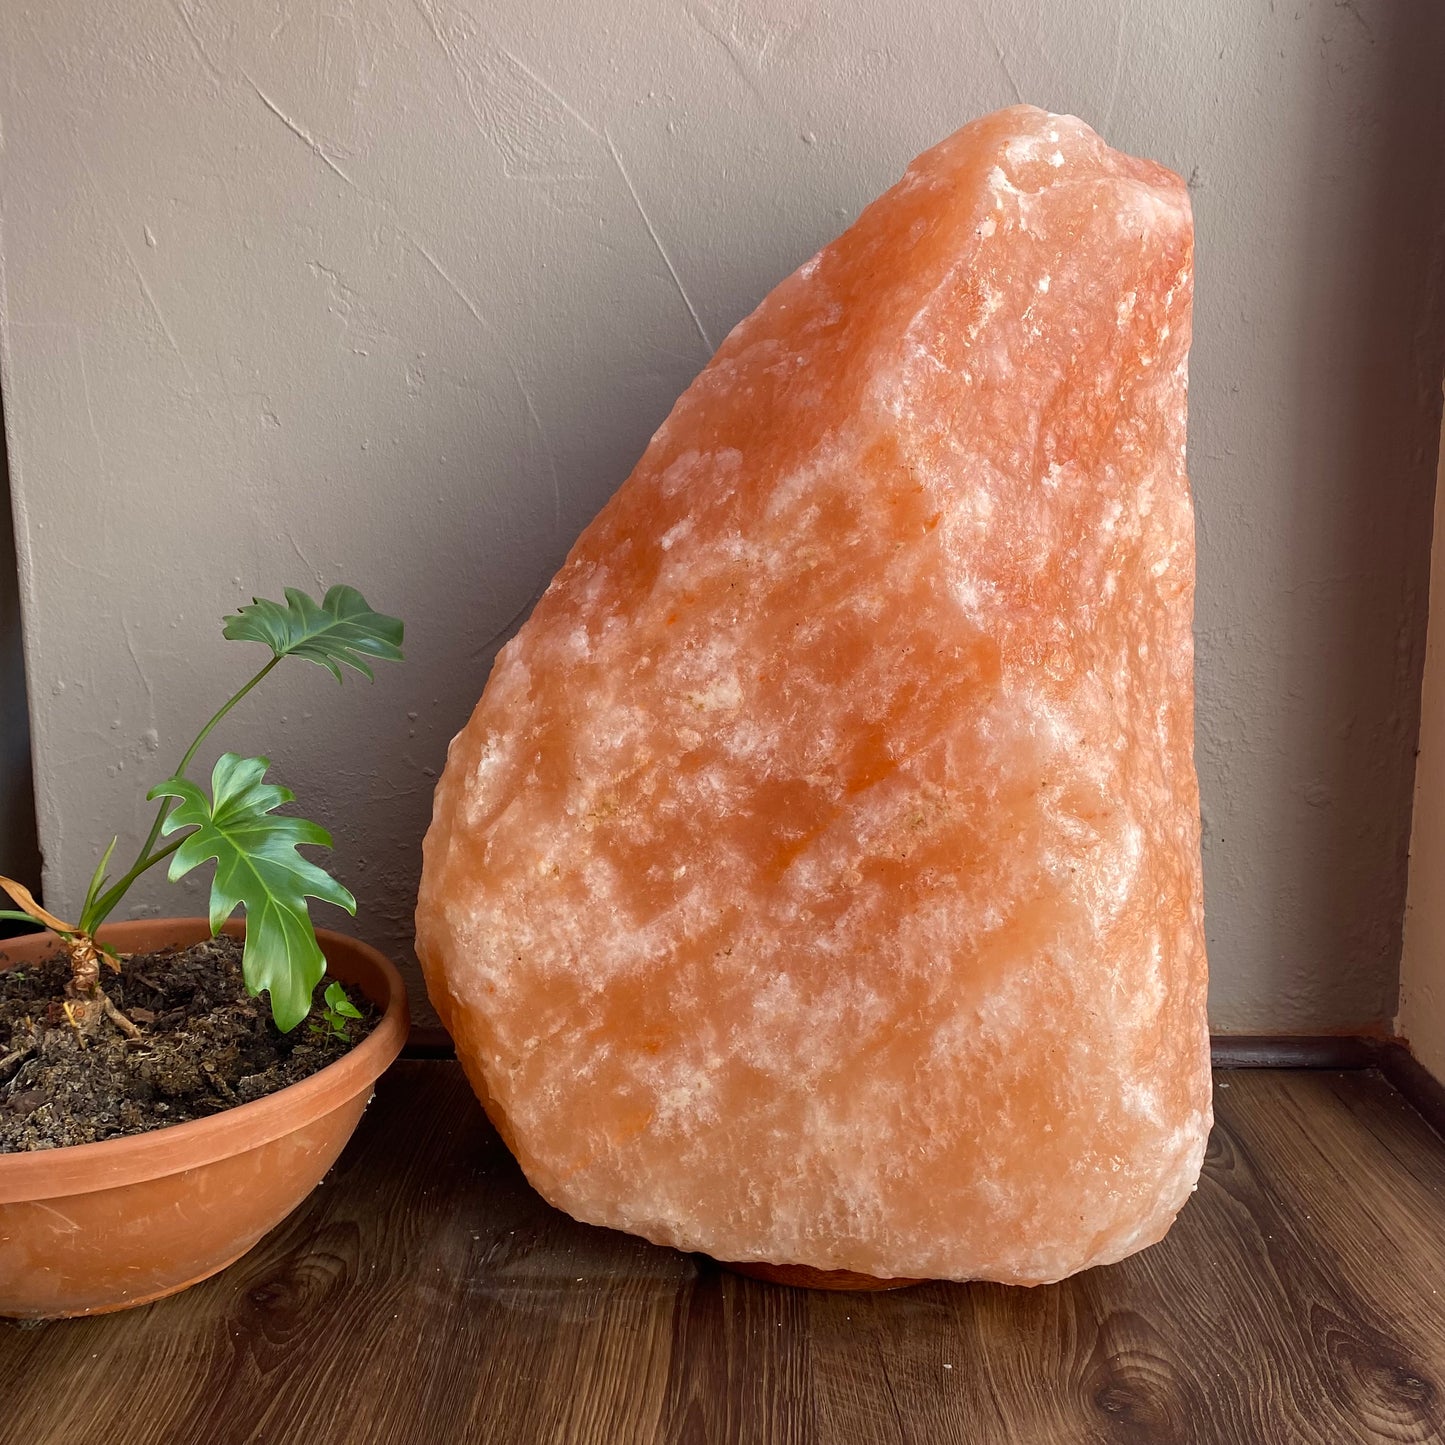 XXL Himalayan Salt Lamp 127kg - Delivery  Free within South Africa